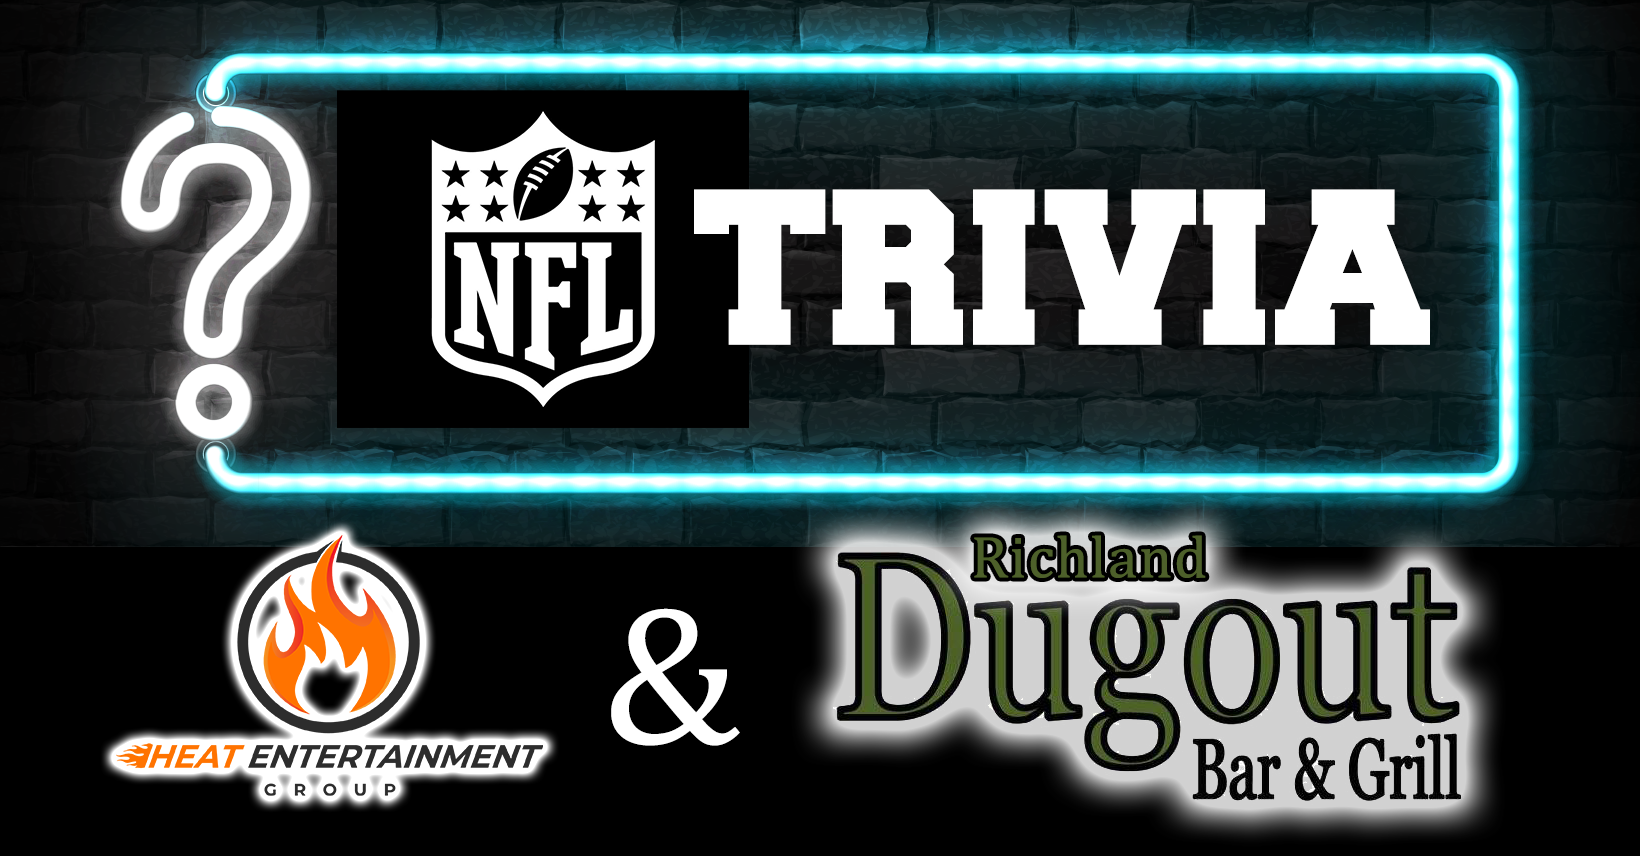 NFL Trivia - Heat Specialty Trivia Night at Richland Dugout with Craig Heat  - Heat Entertainment Group